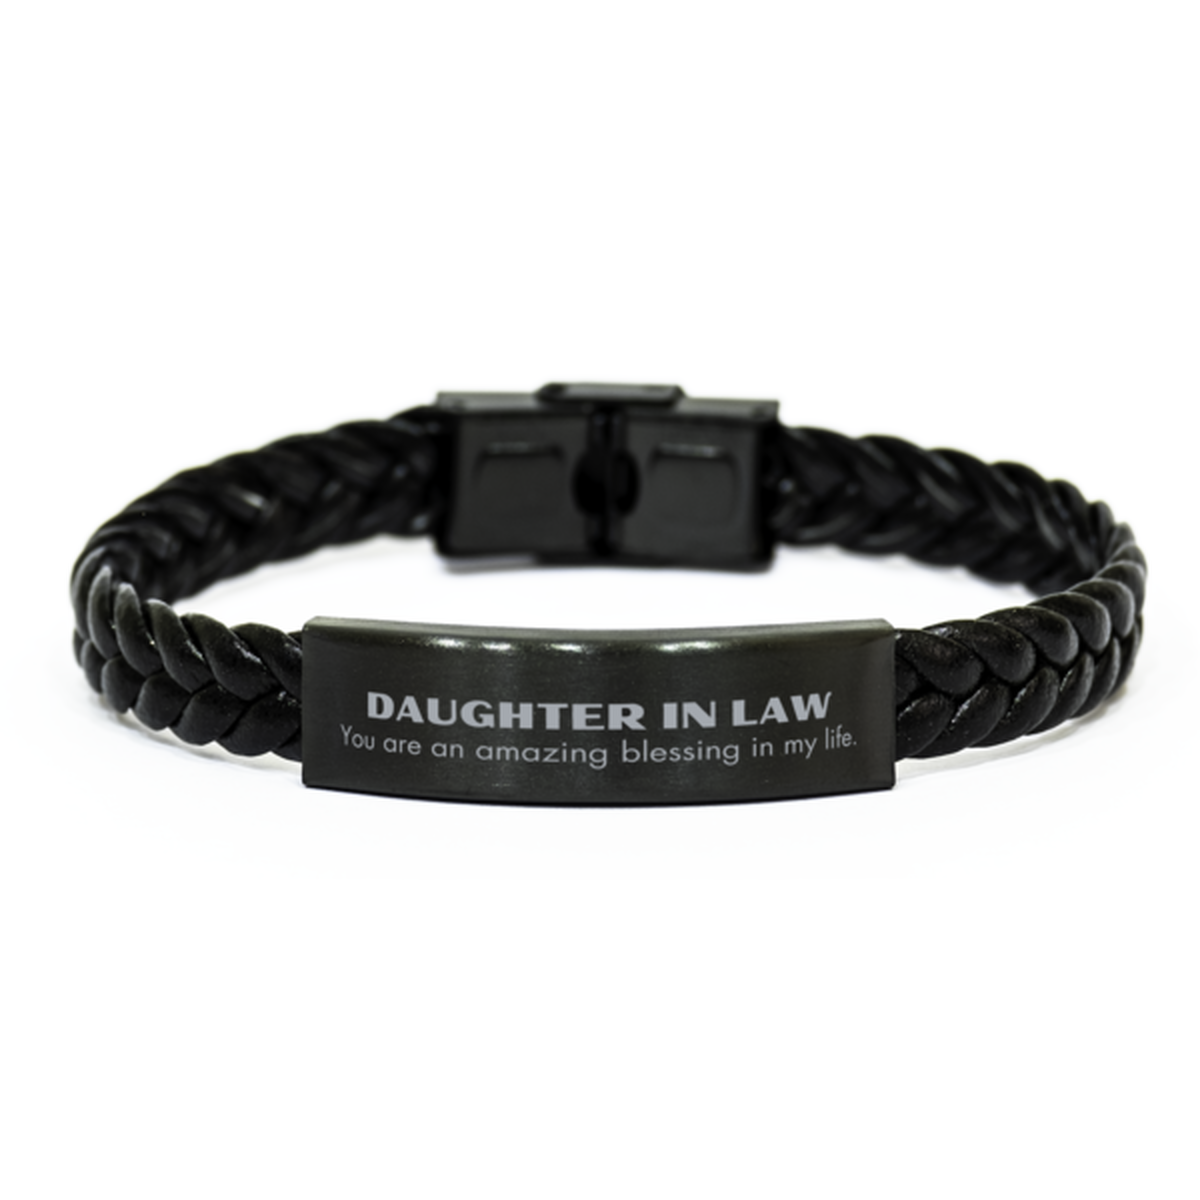 Daughter In Law Braided Leather Bracelet, You are an amazing blessing in my life, Thank You Gifts For Daughter In Law, Inspirational Birthday Christmas Unique Gifts For Daughter In Law